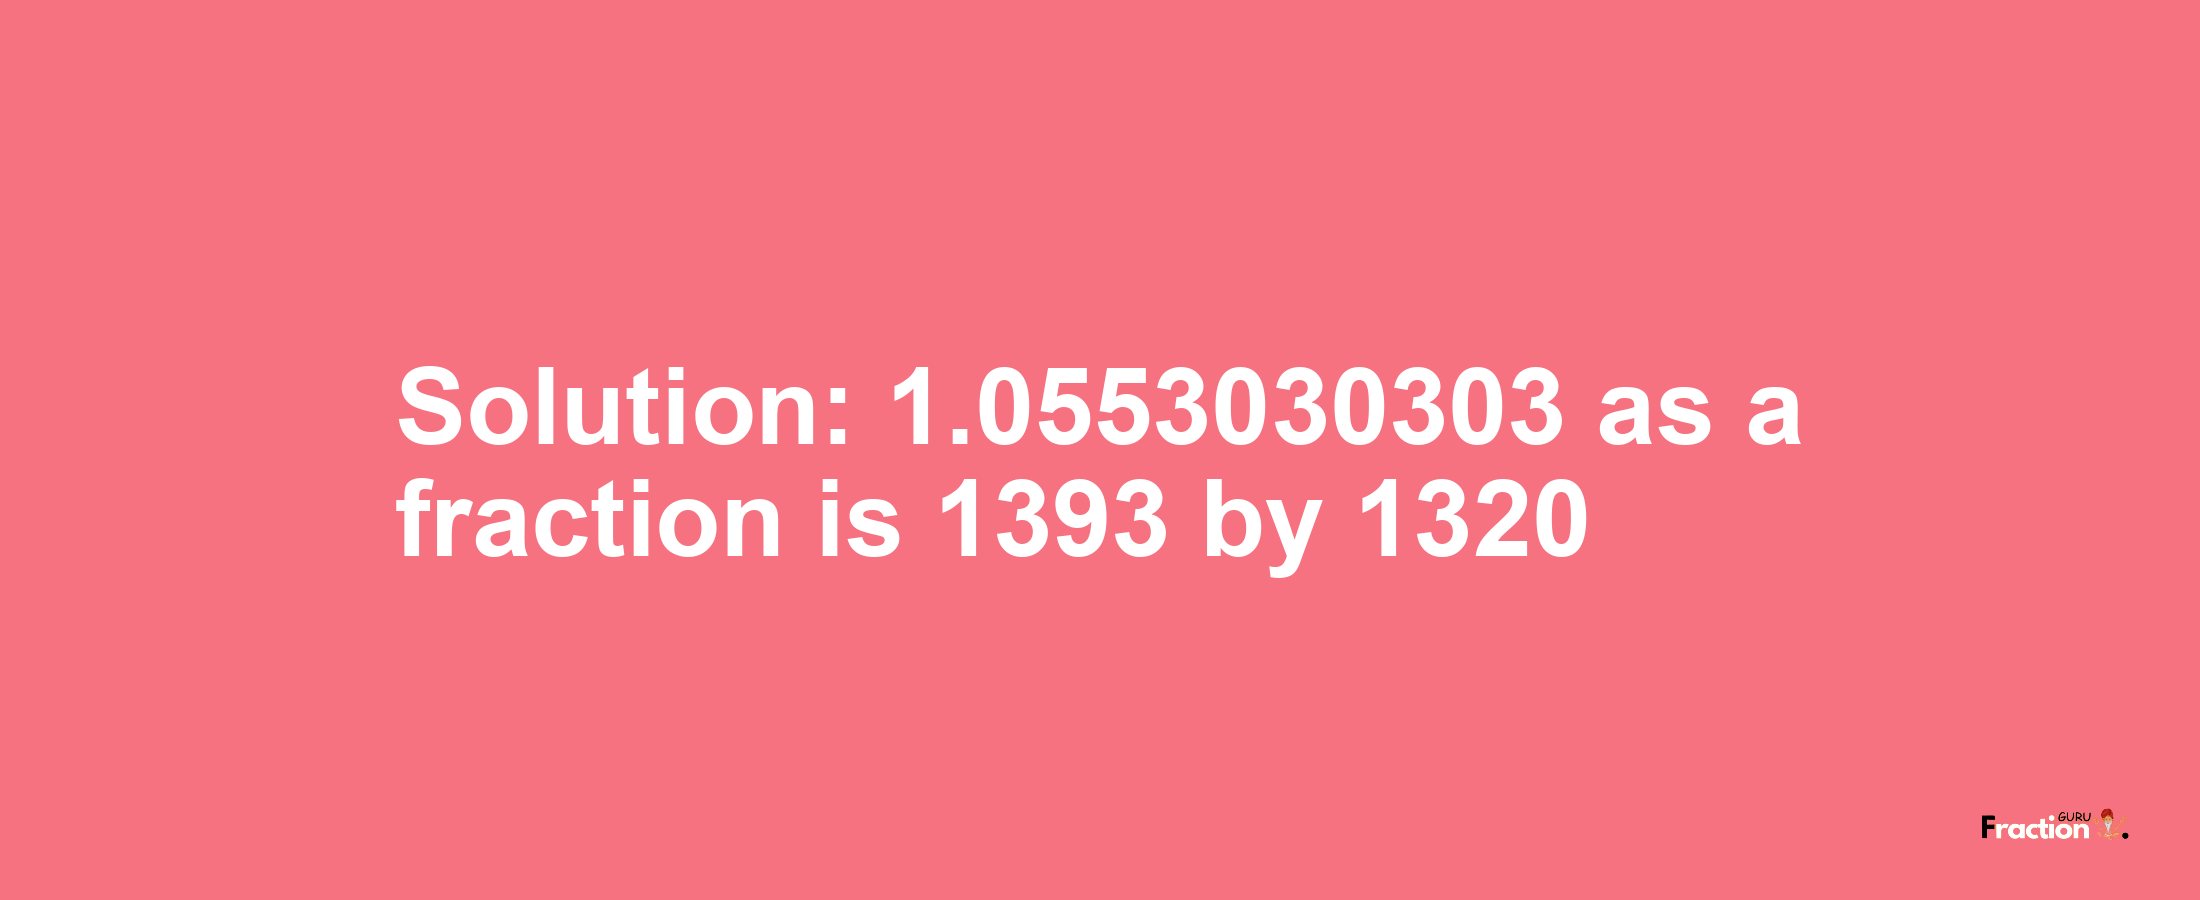 Solution:1.0553030303 as a fraction is 1393/1320